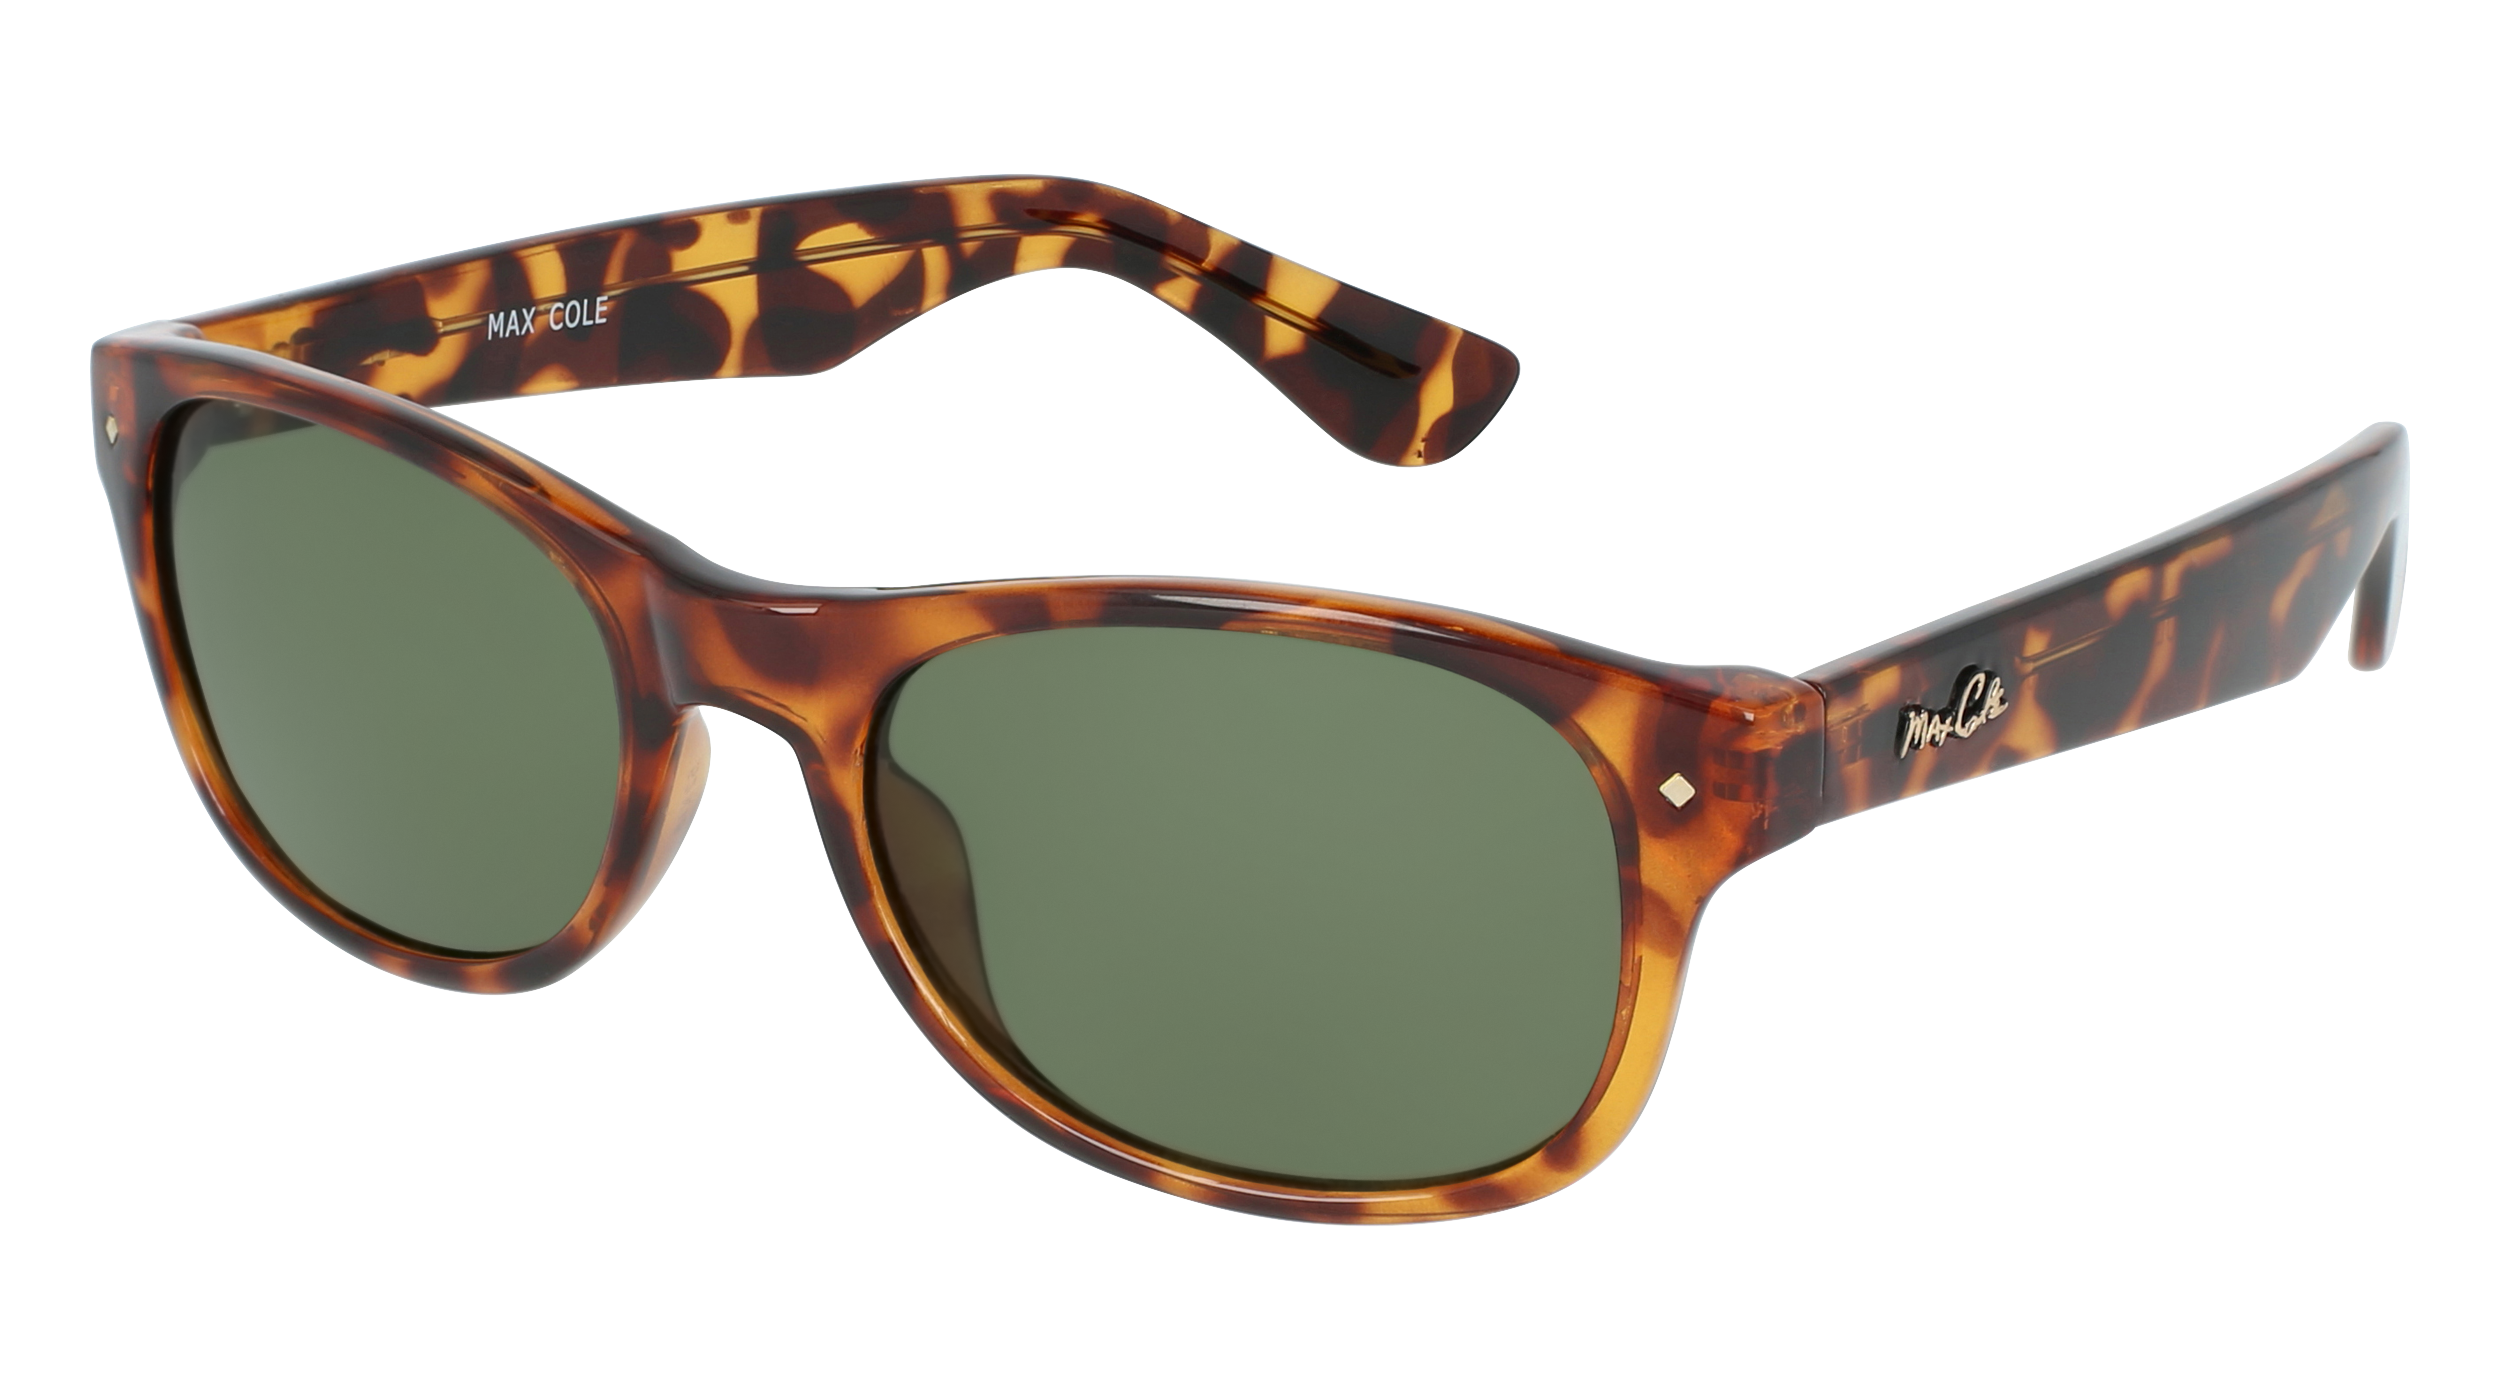 M MC 1456 men's sunglasses (from the side)